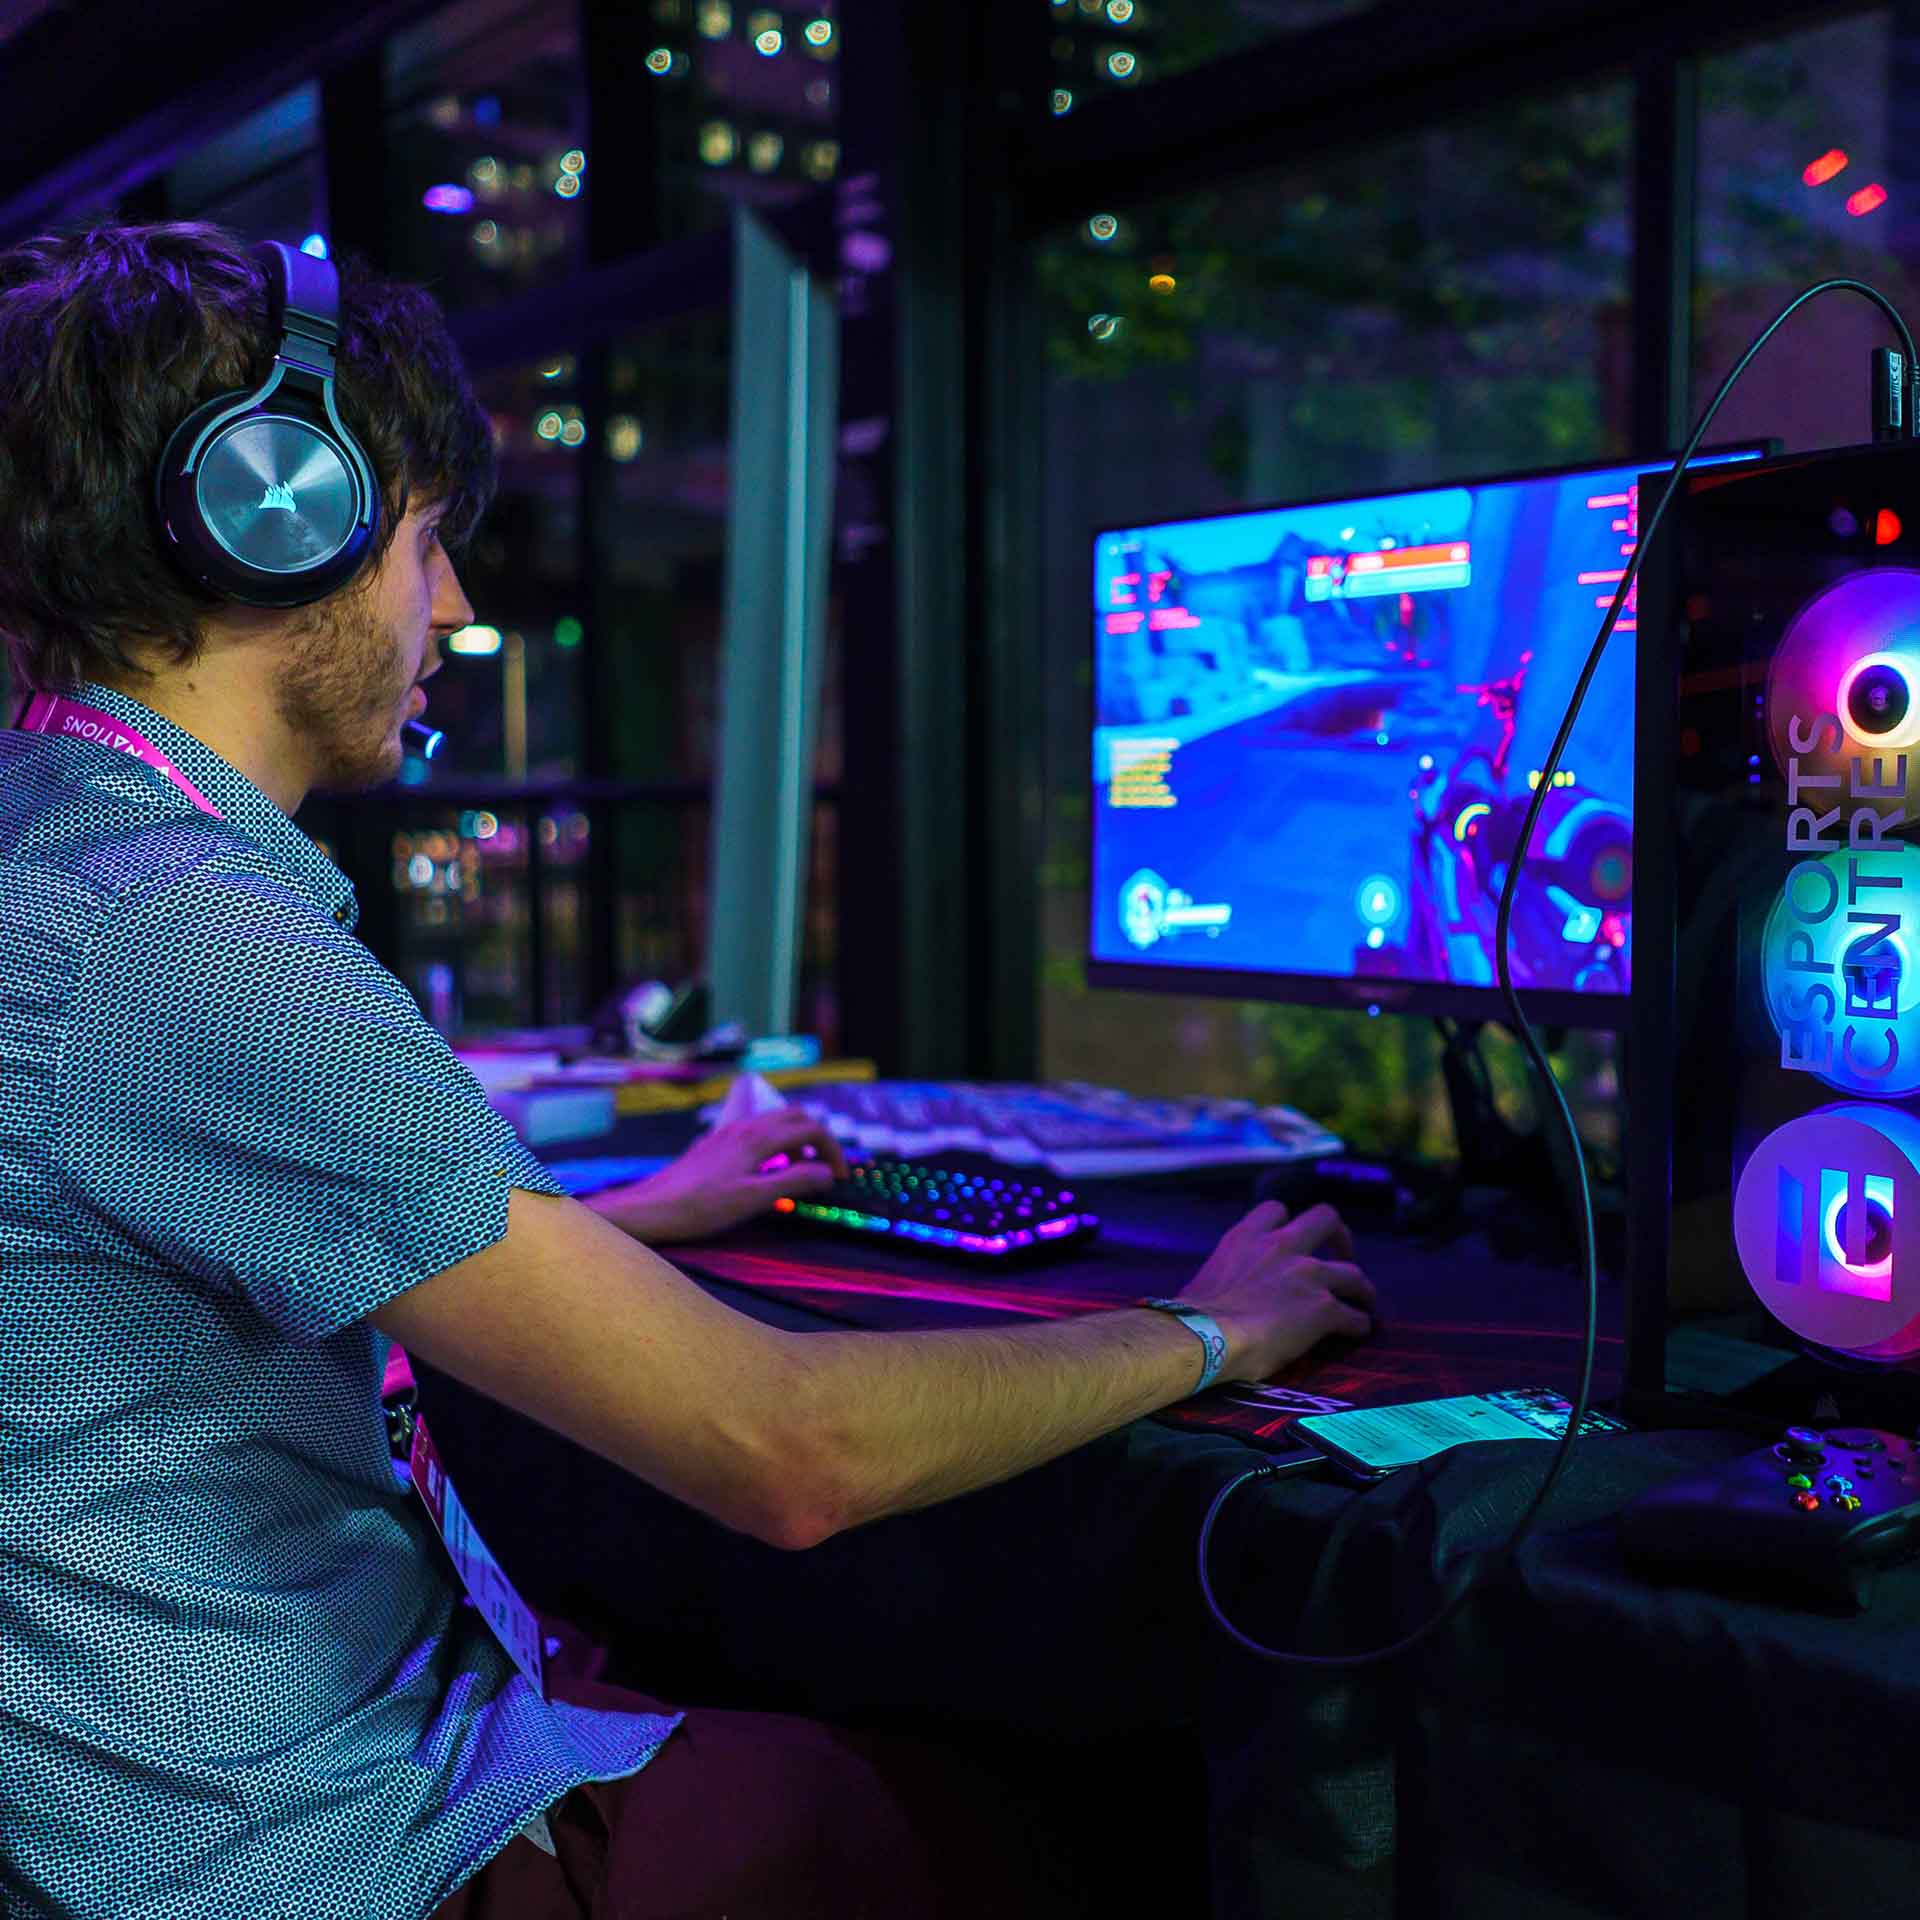 A PC gamer playing a game with a headset on, next to a computer tower with rainbow coloured fans.